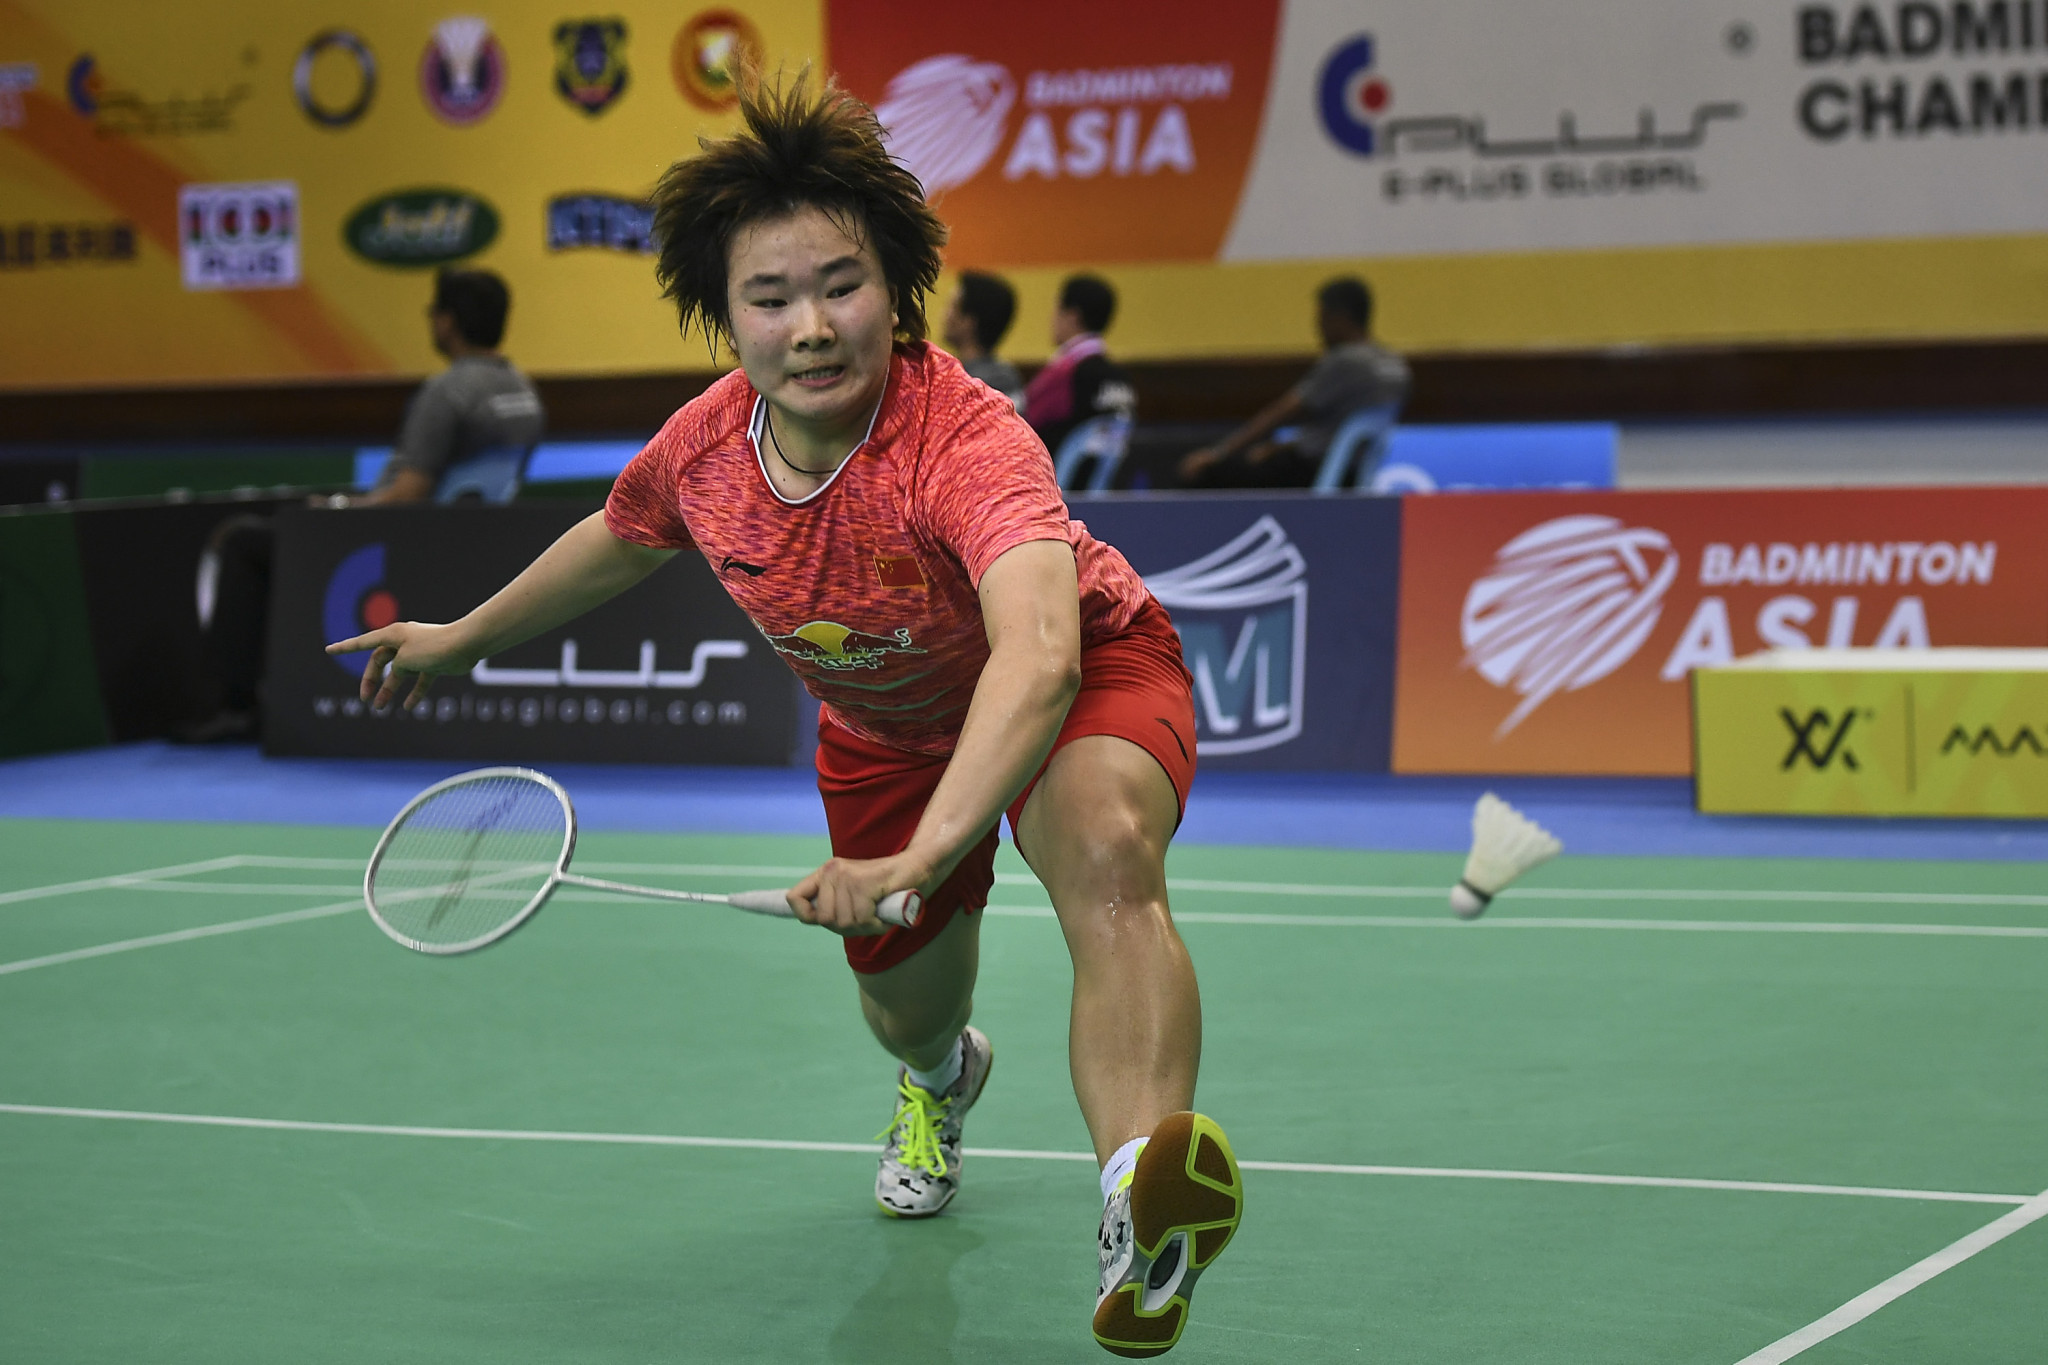 China advanced to the women's final of the Badminton Asia Team Championships as they aim to defend their title ©Getty Images